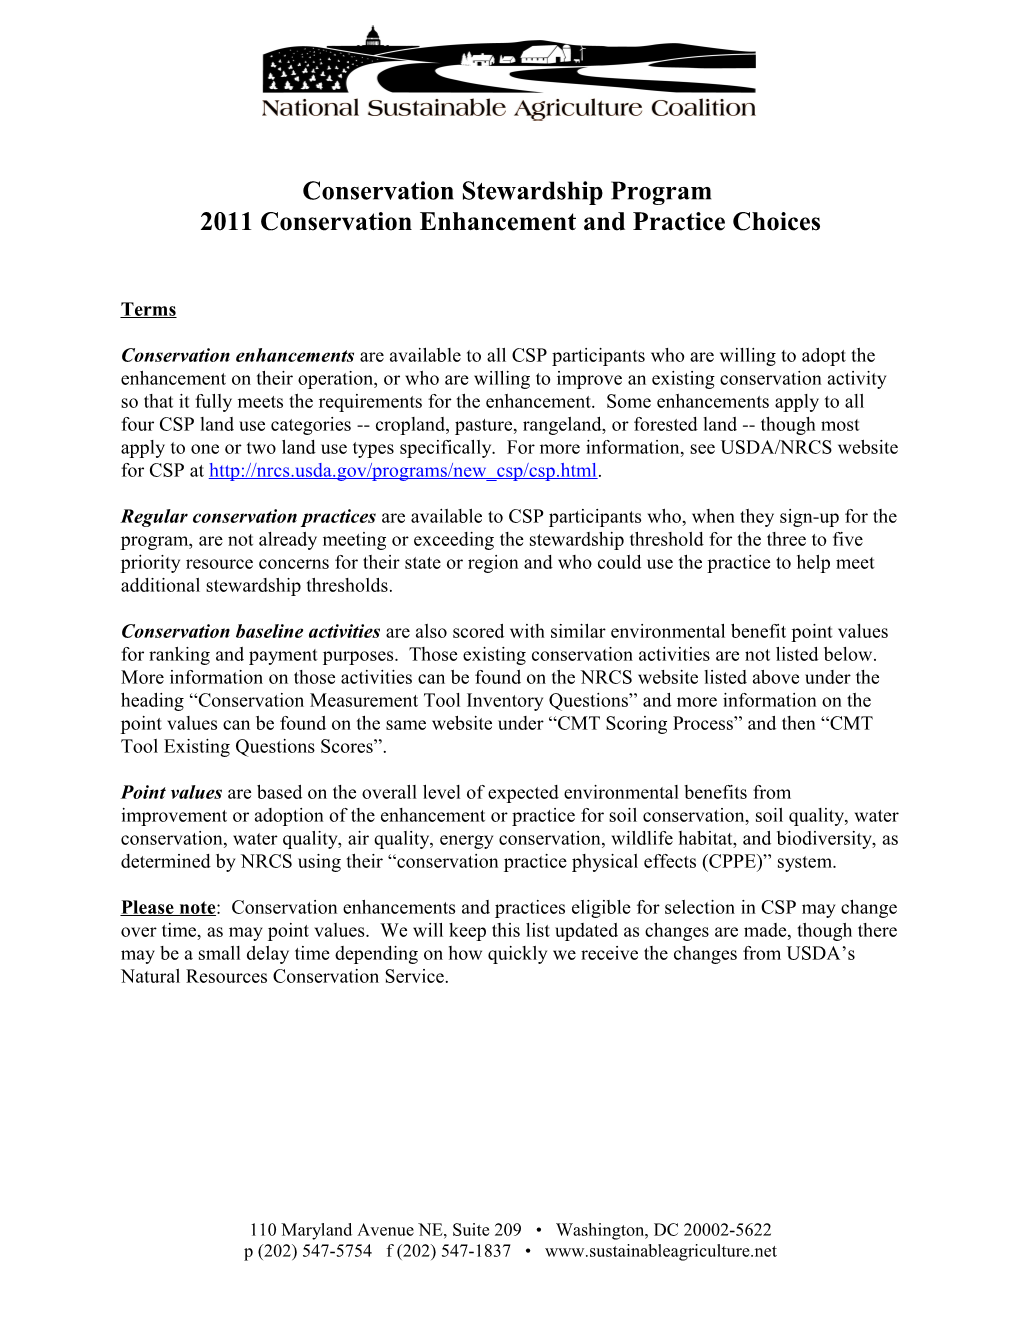 2011 Conservation Enhancement and Practice Choices